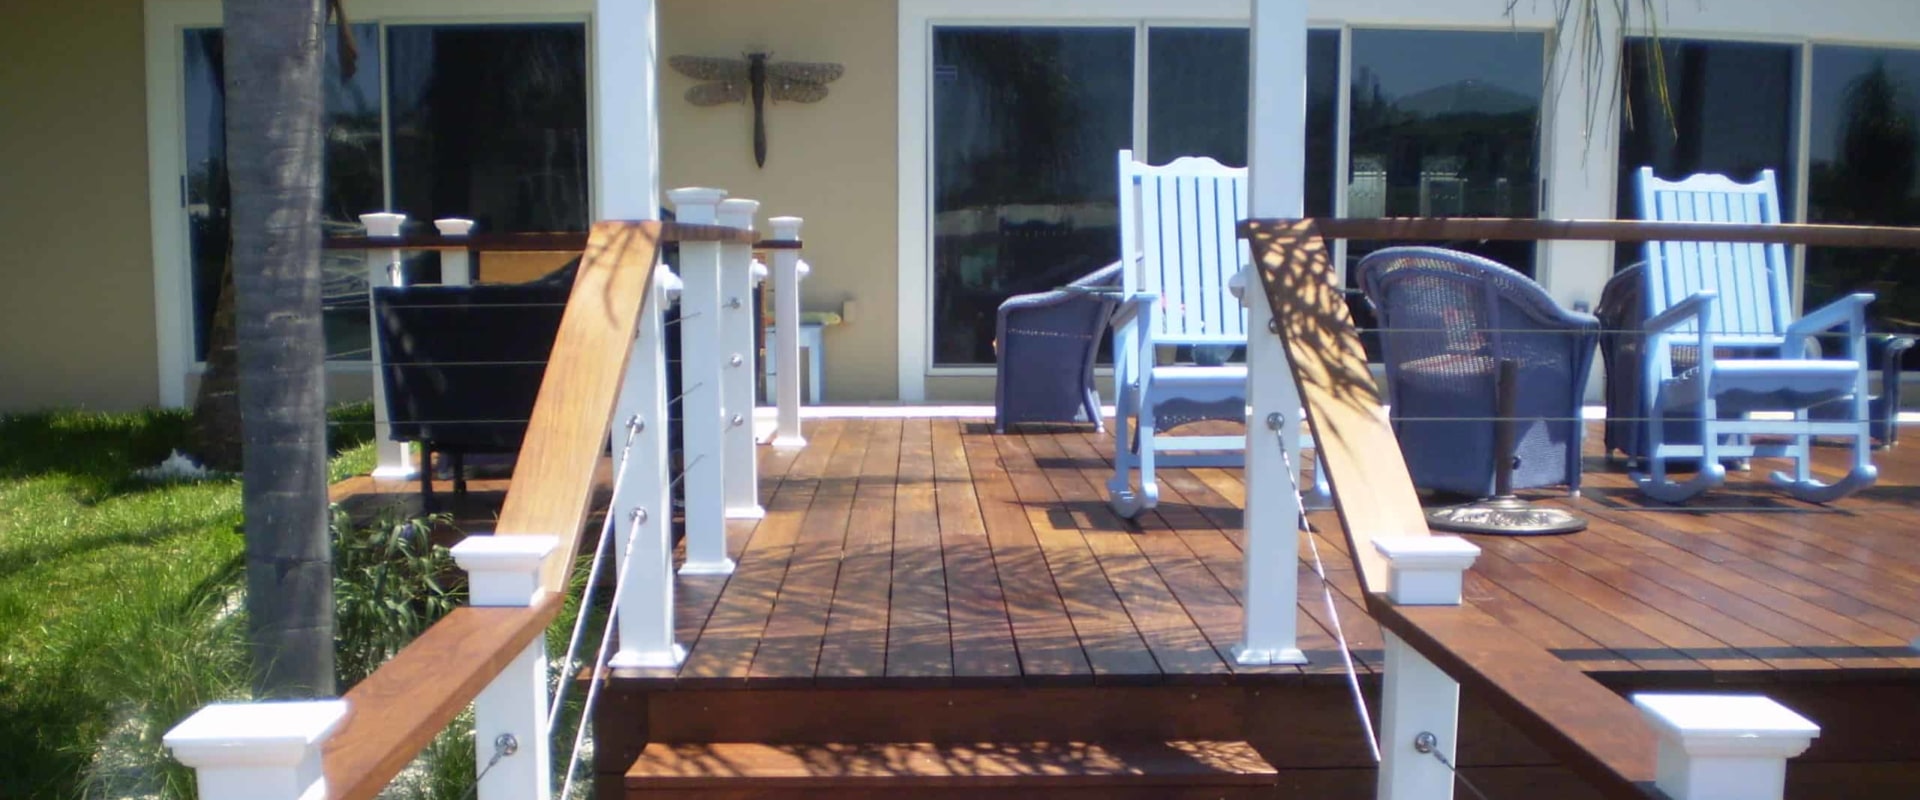 Deck Repair - What You Need To Know